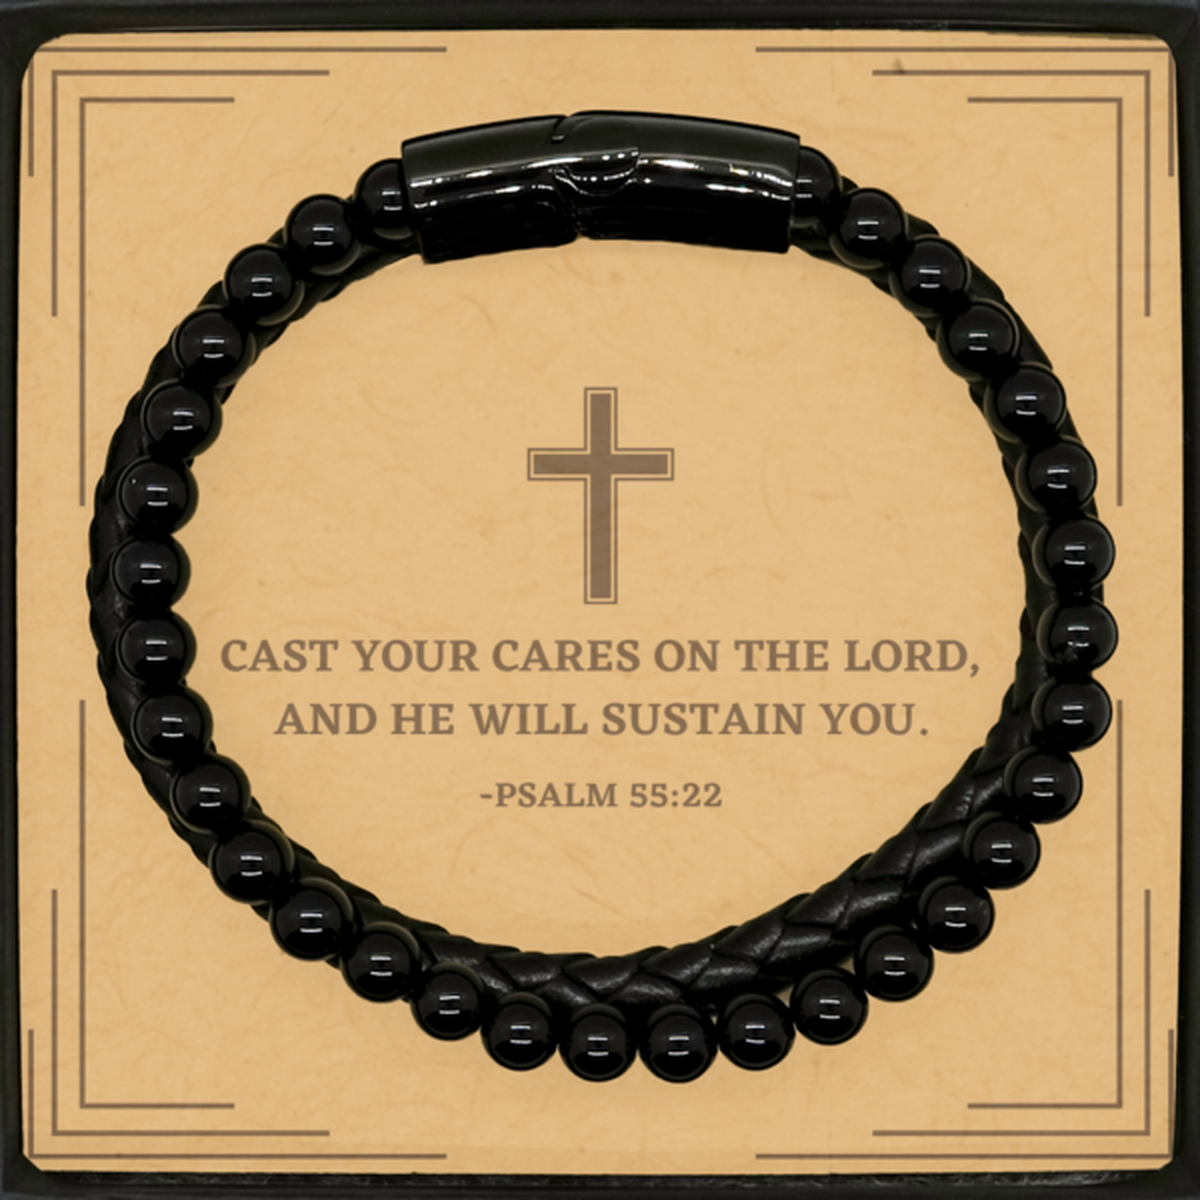 Baptism Gifts For Teenage Boys Girls, Christian Bible Verse Stone Leather Bracelet, Cast your cares on the Lord, Confirmation Gifts, Bible Verse Card for Son, Godson, Grandson